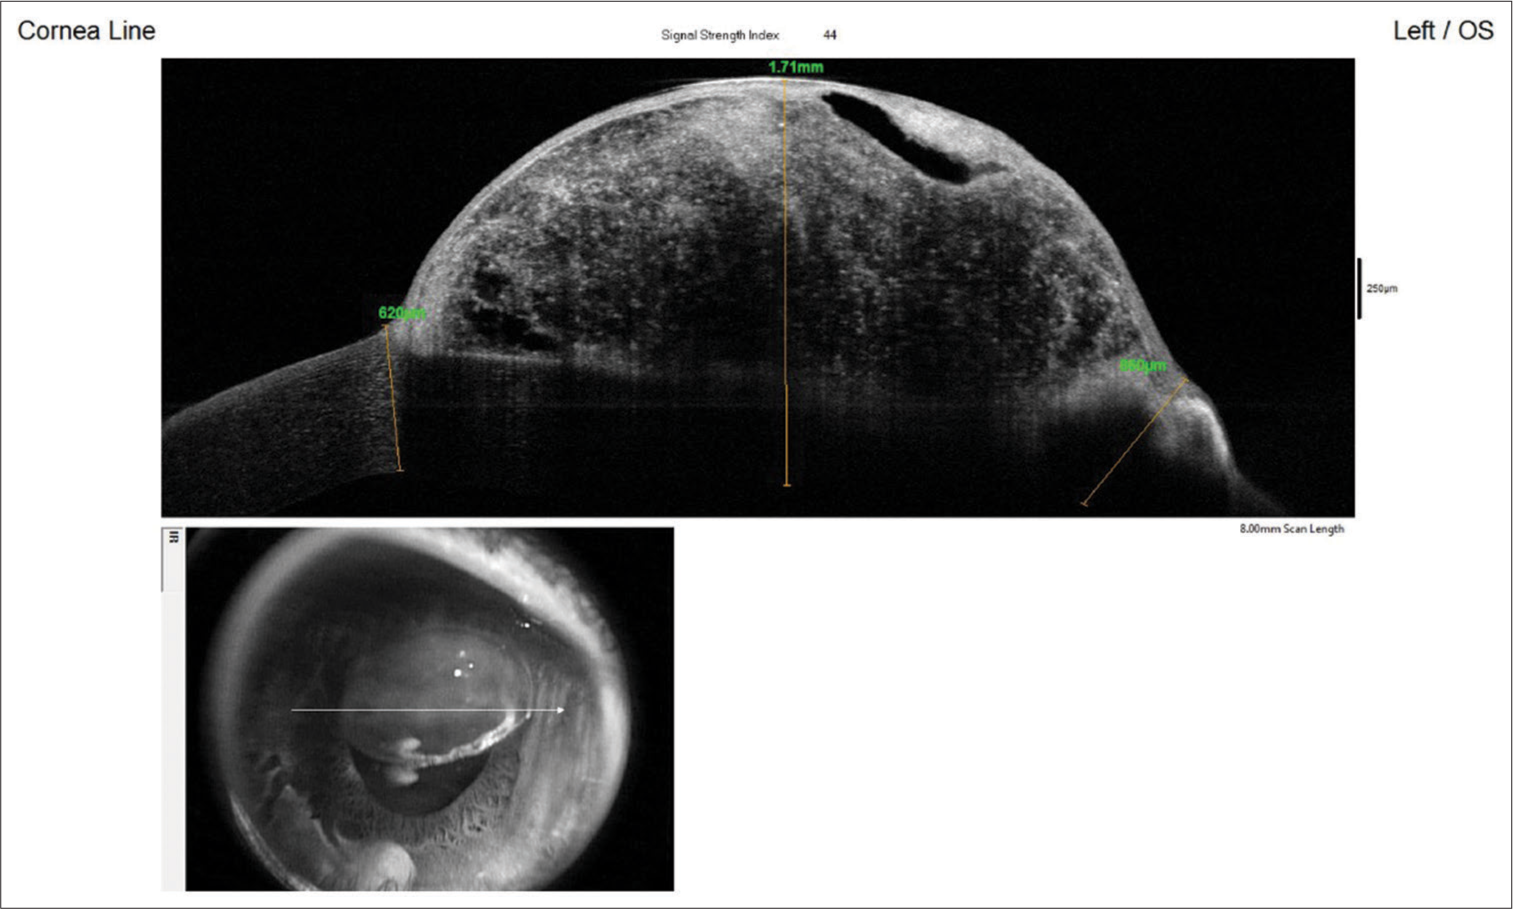 AS-OCT - Anterior segment optical coherence tomography (Optovue, Fremont, CA) image showing cystic lesion of the iris.